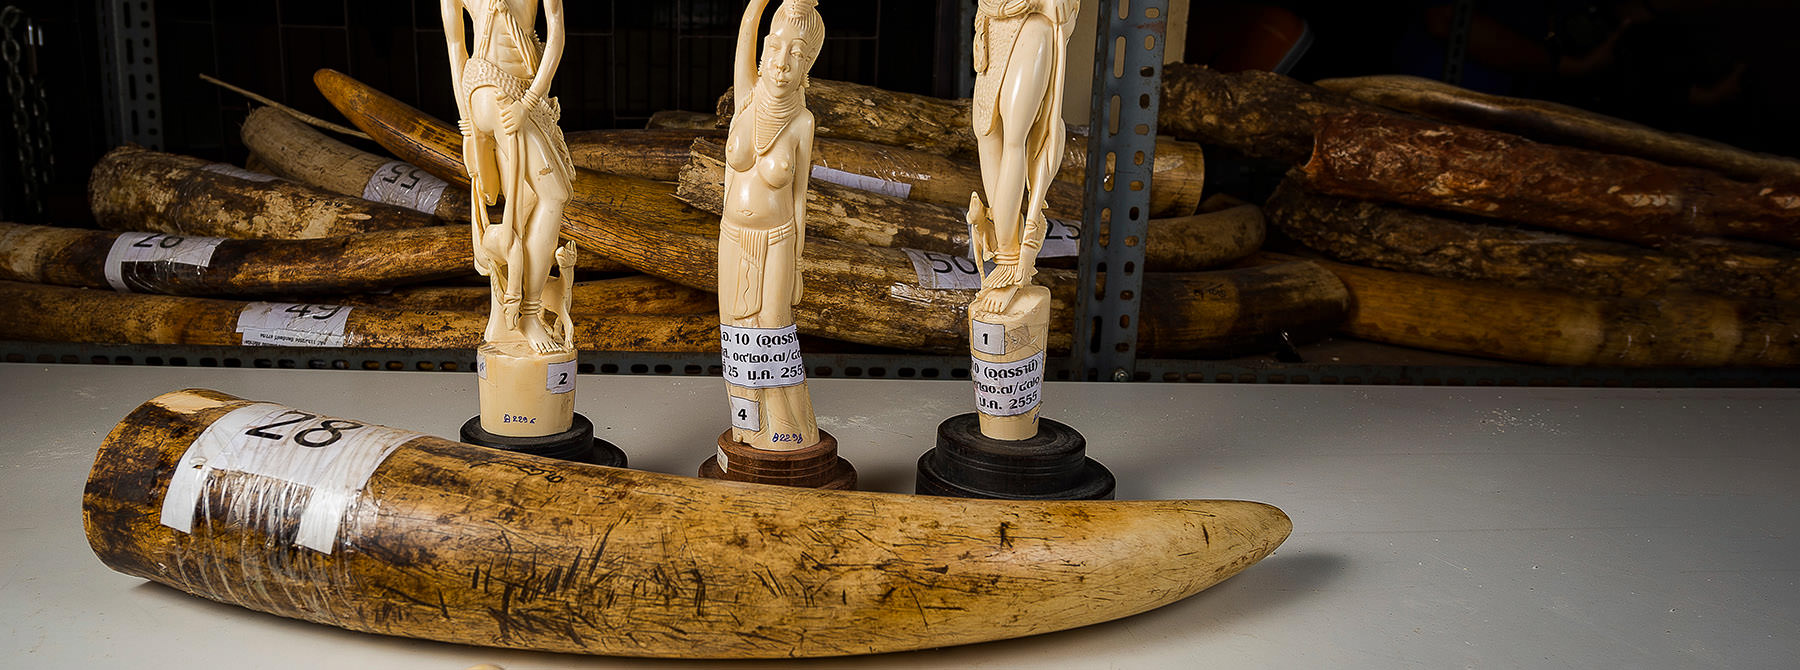 Seized ivory by the Department of National Parks, Bangkok © Ola Jennersten / WWF-Sweden